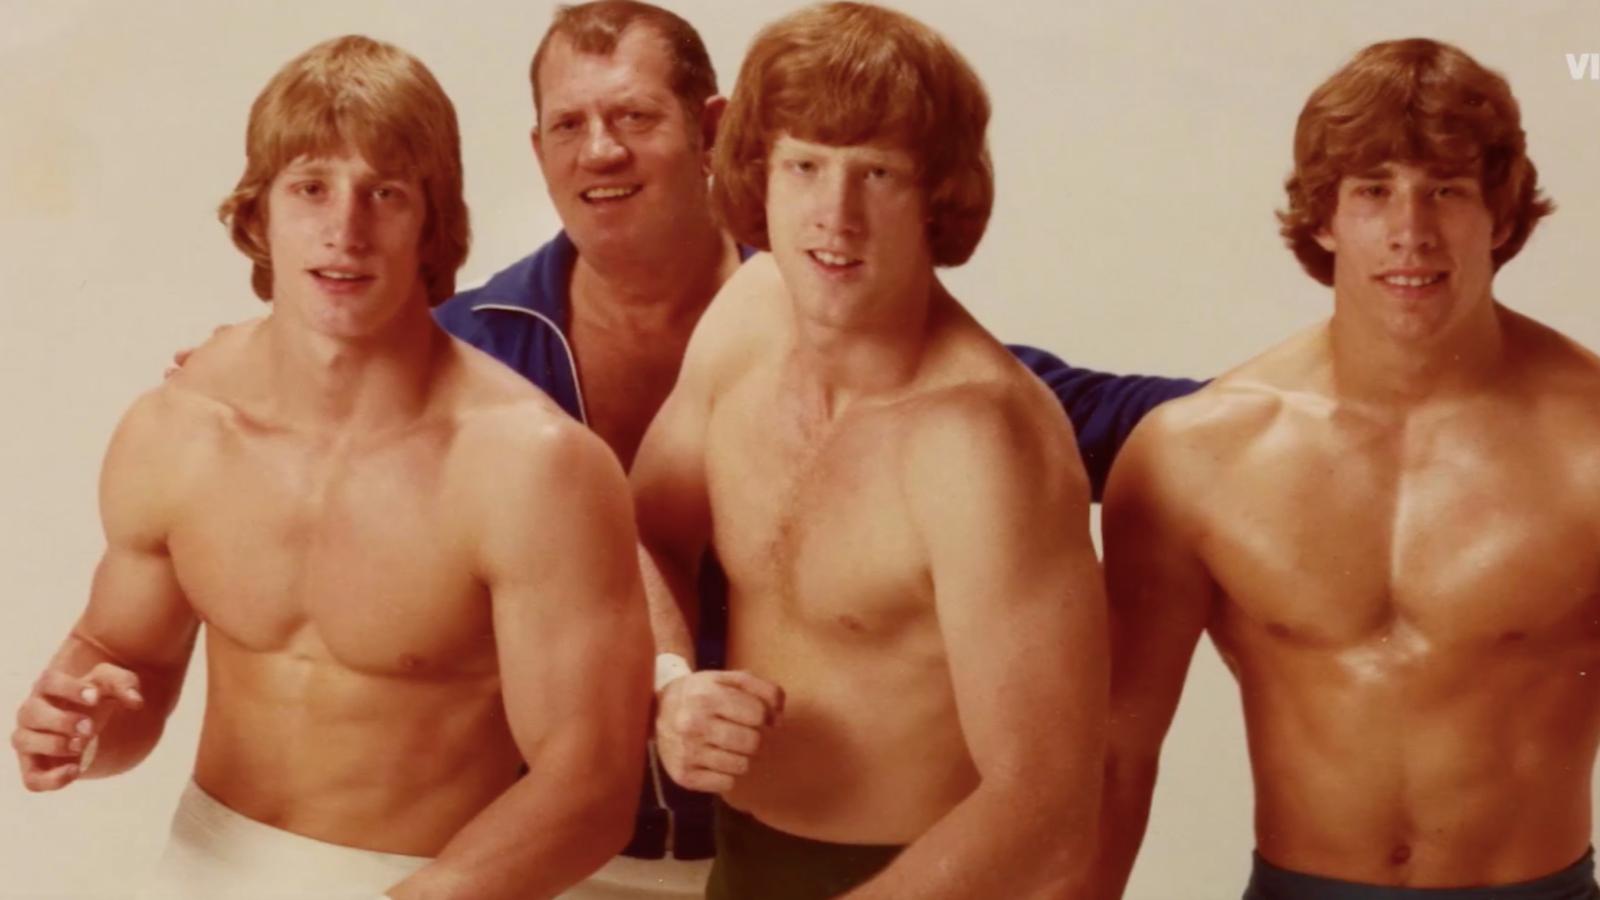 Kevin, Kerry, and David Von Erich with their father